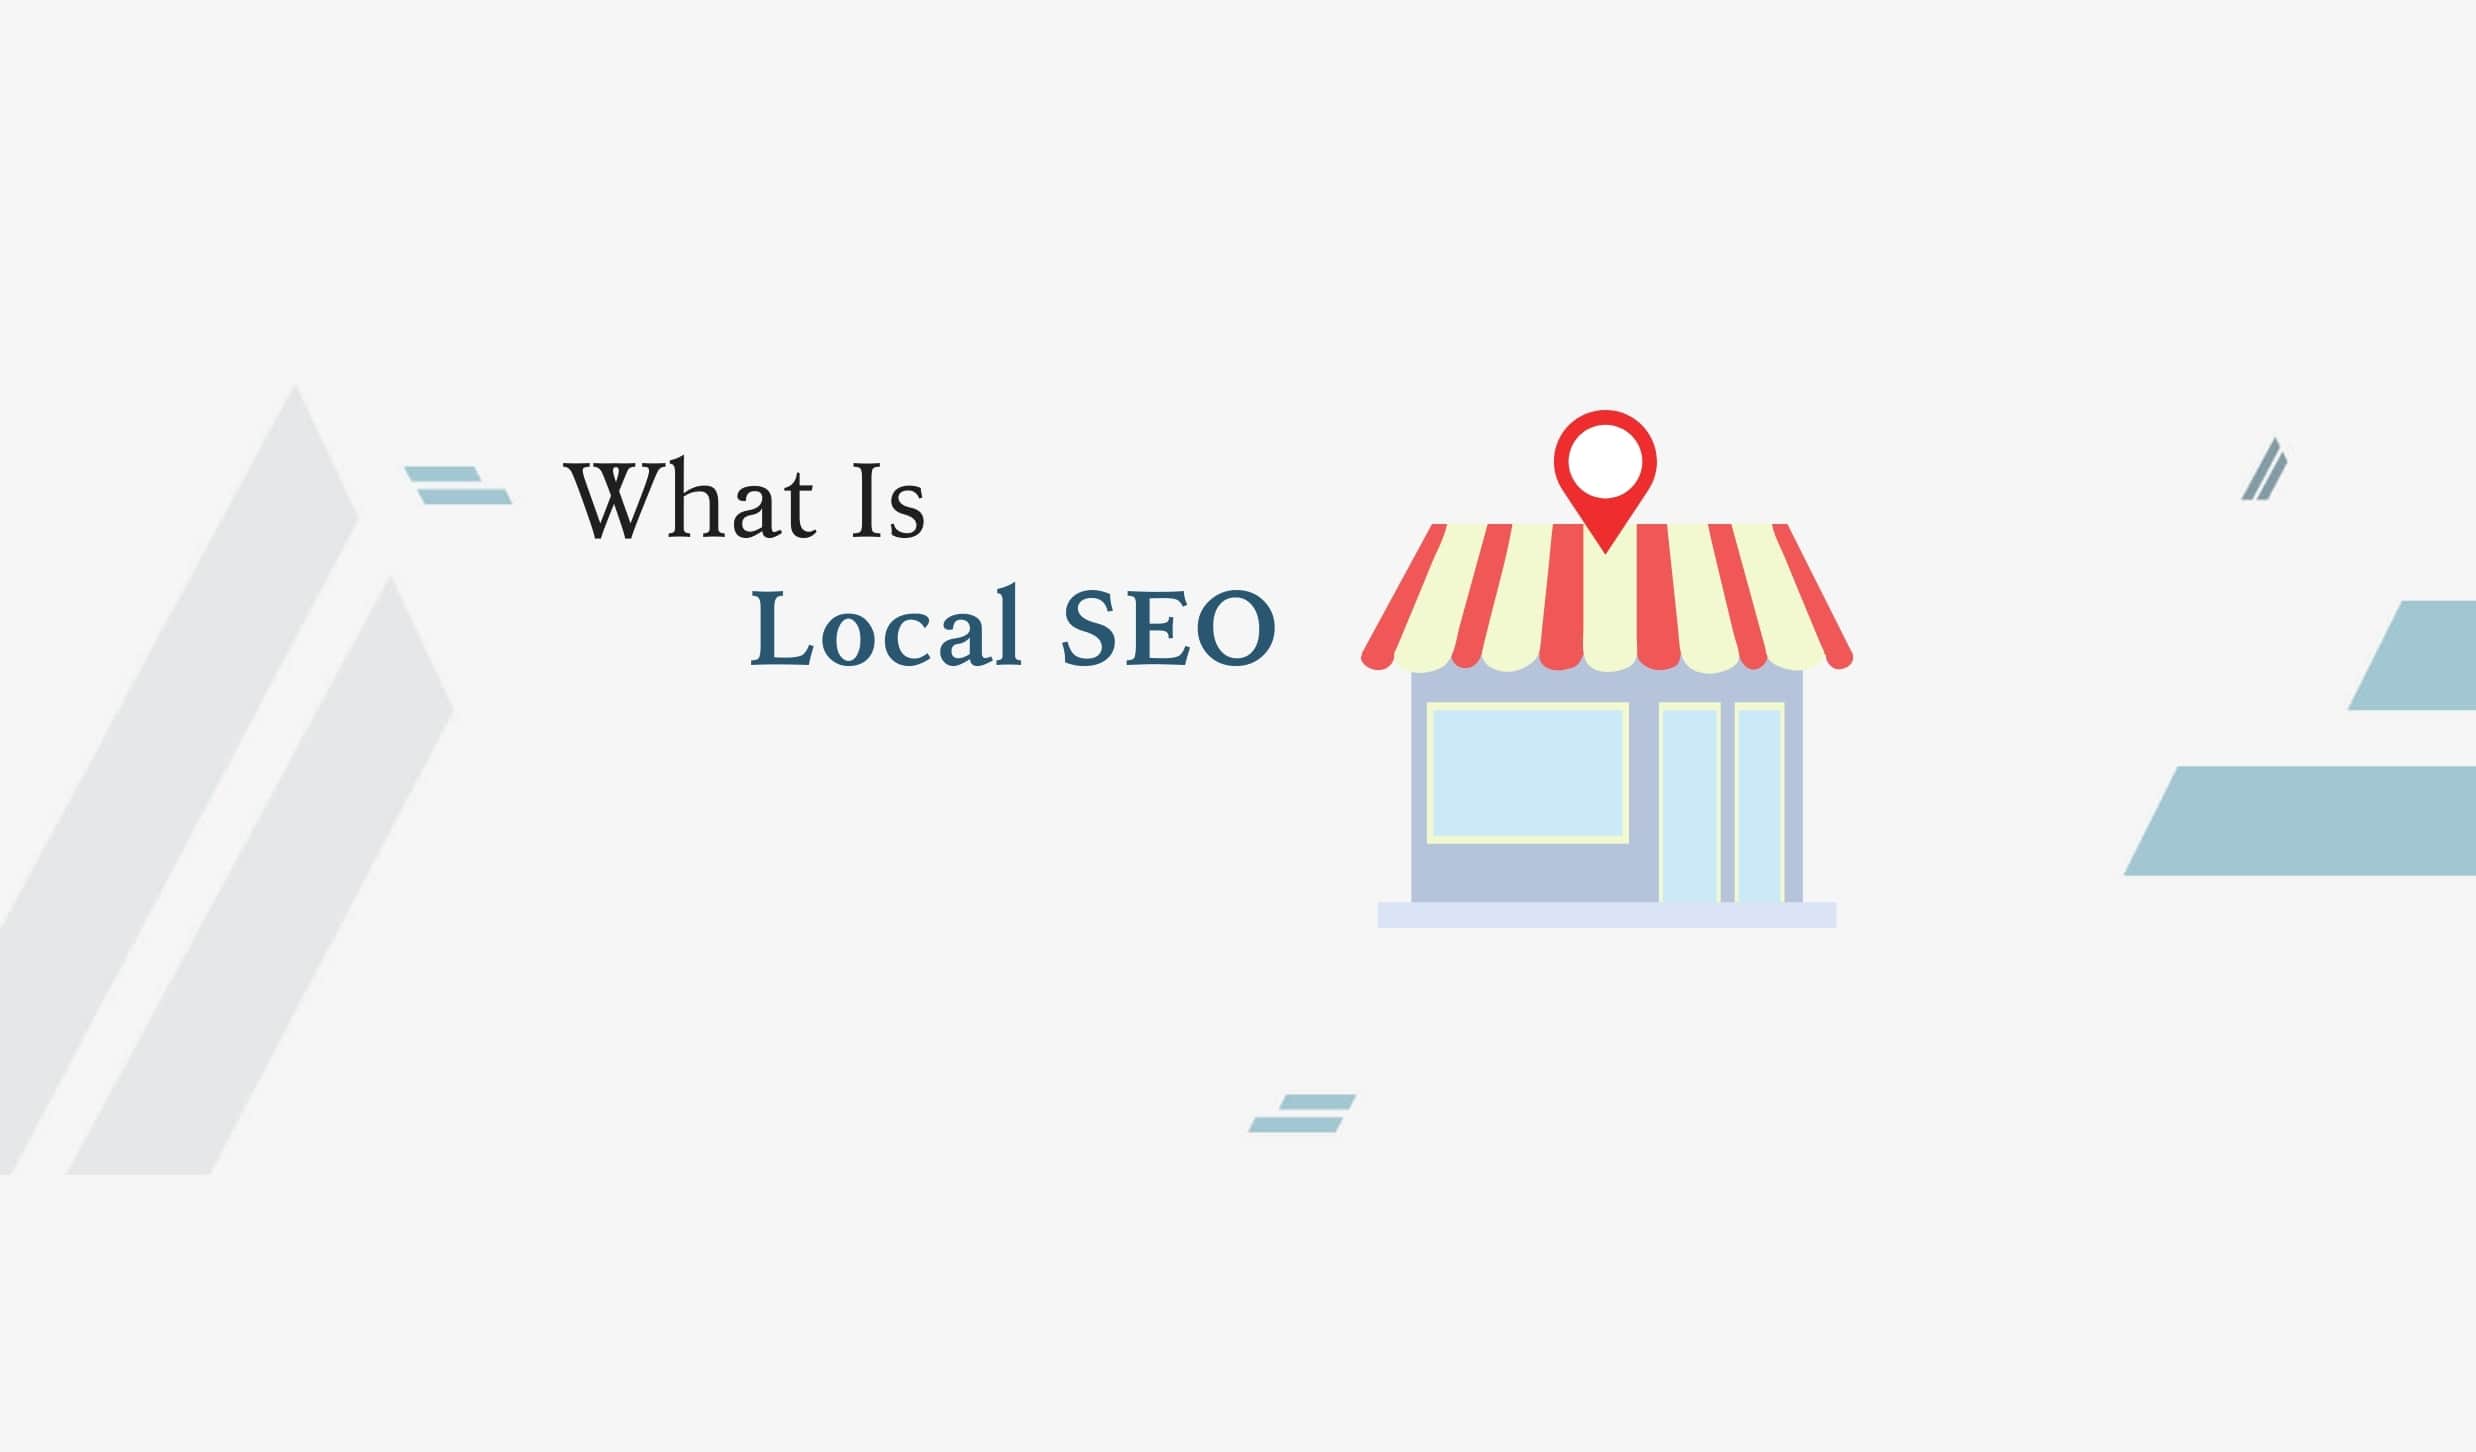 What Is Local SEO? Why Do You Need It? 3 Simple Tips To Increase Your Website's Local SEO Traffic.